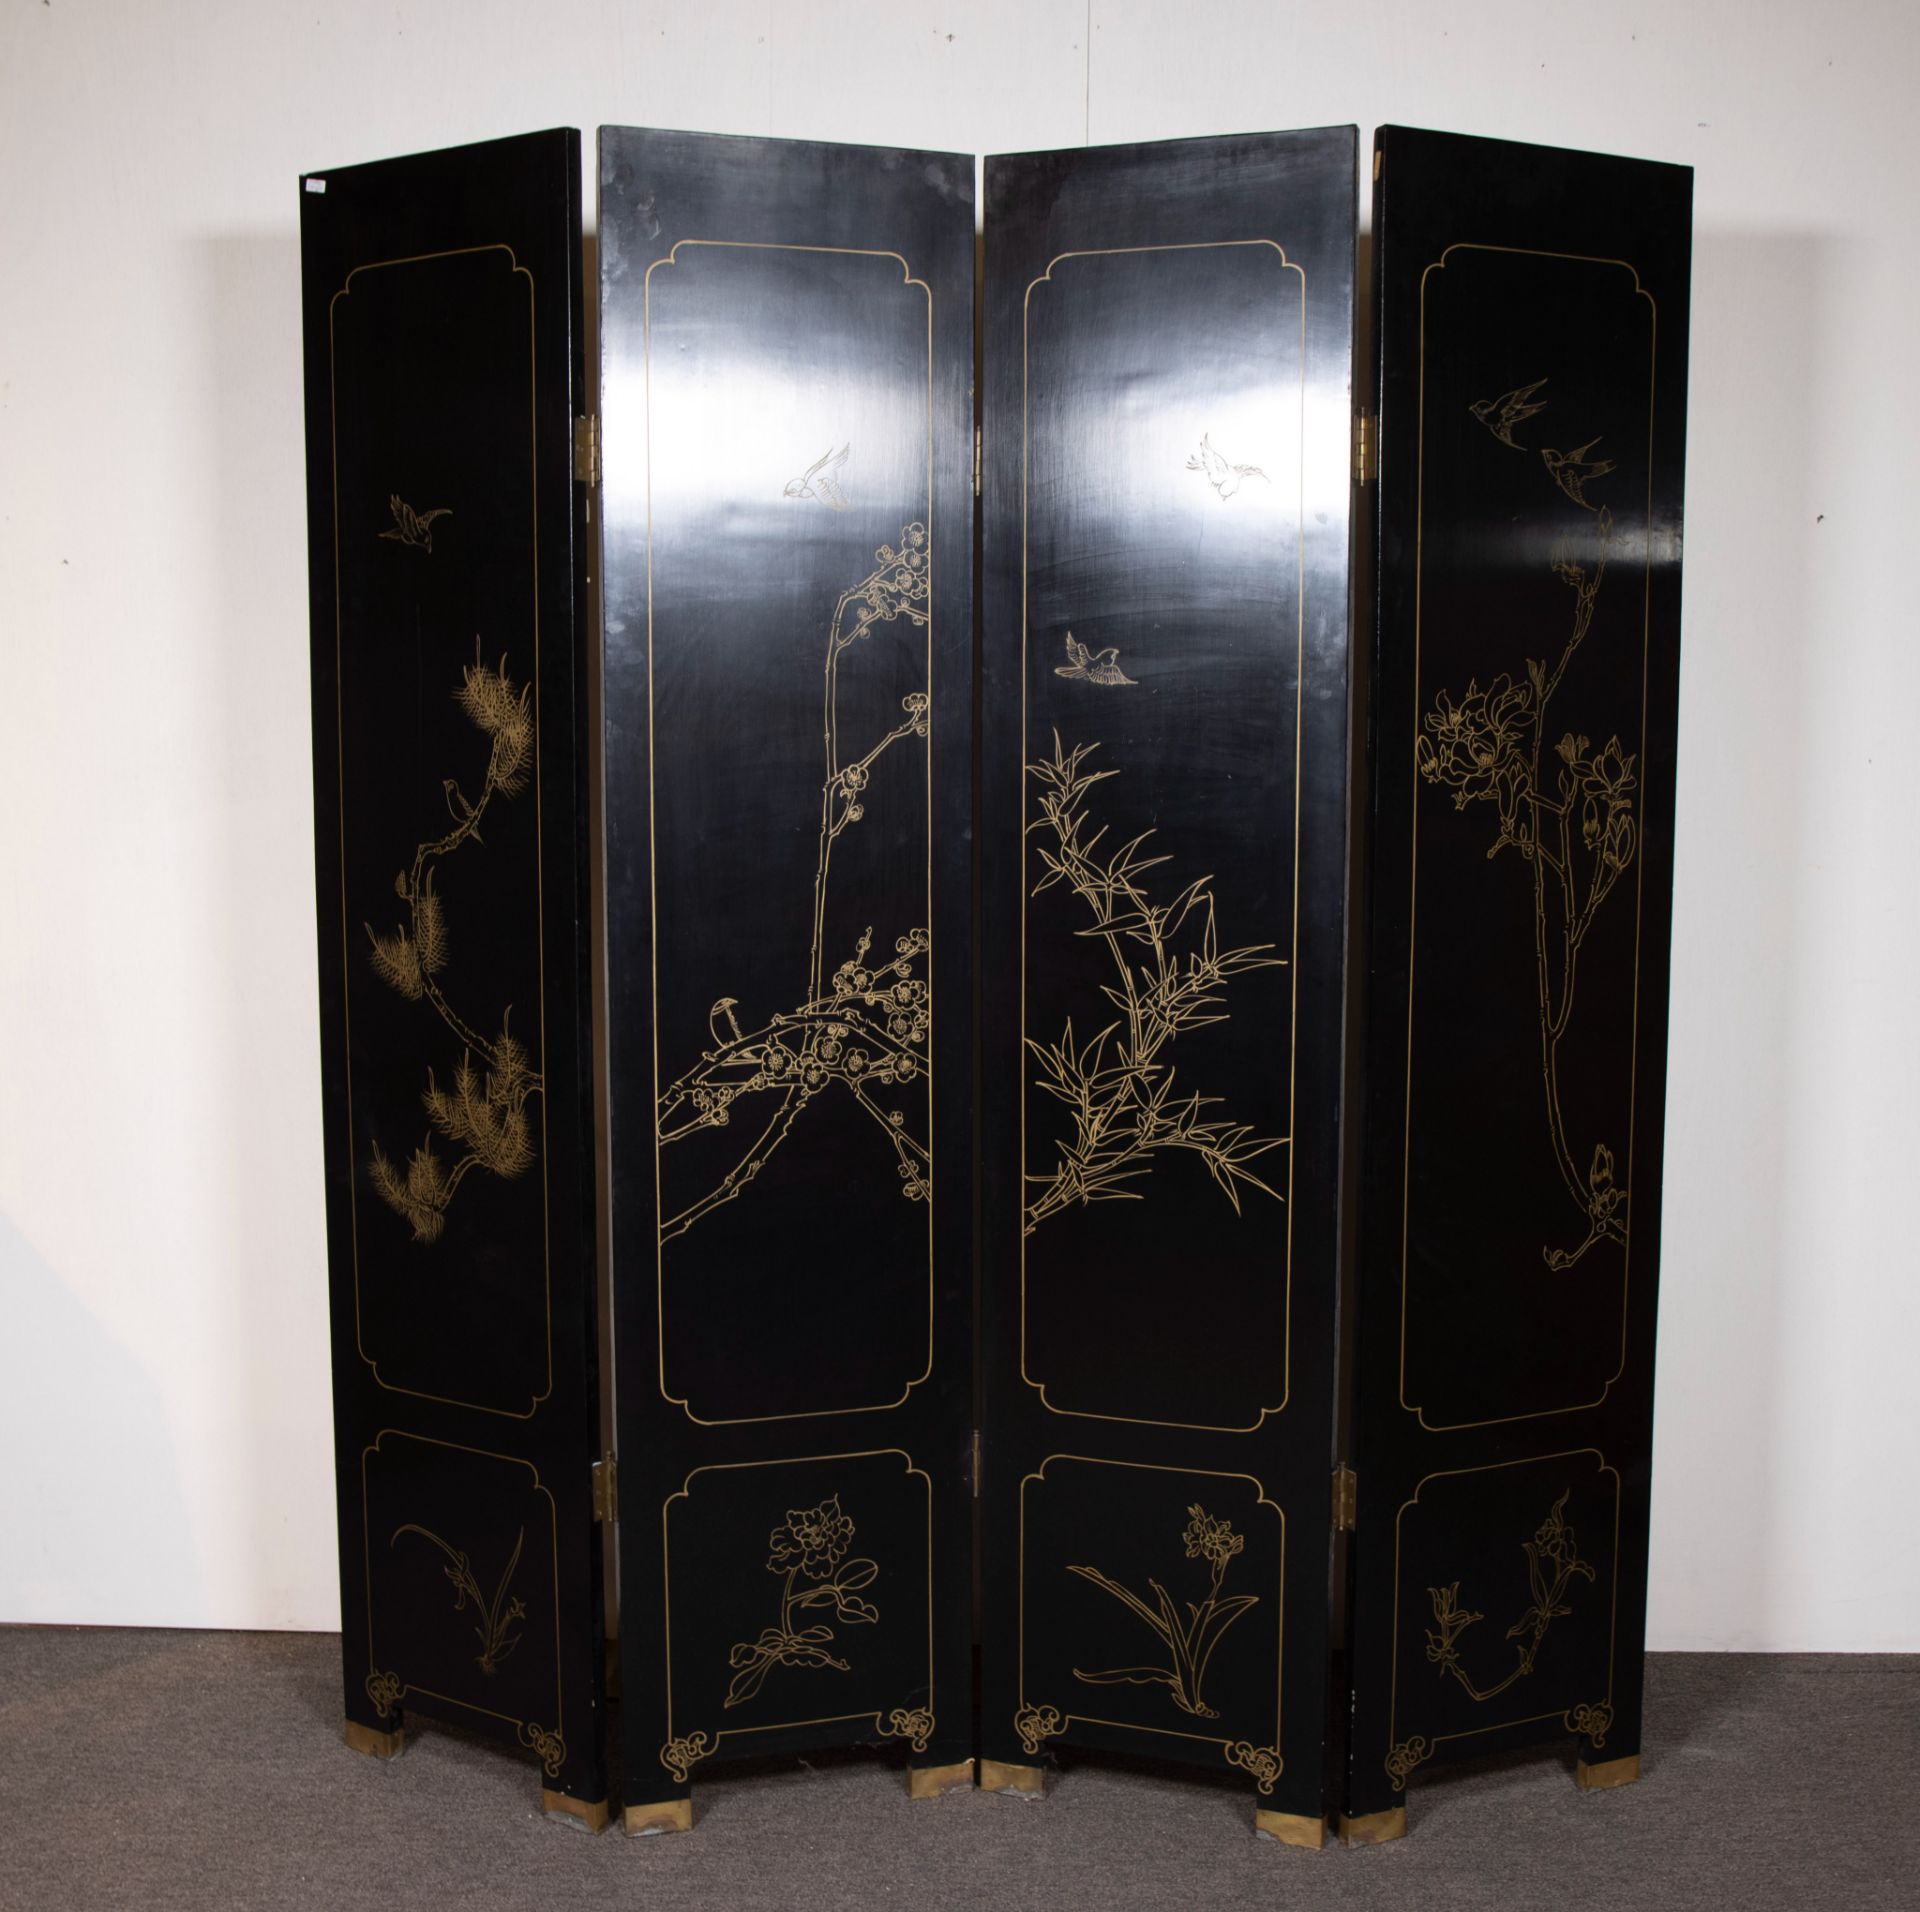 Chinese paravant, 4 shutters lacquered black, raised with figures and motifs in jade/serpentine - Bild 2 aus 2